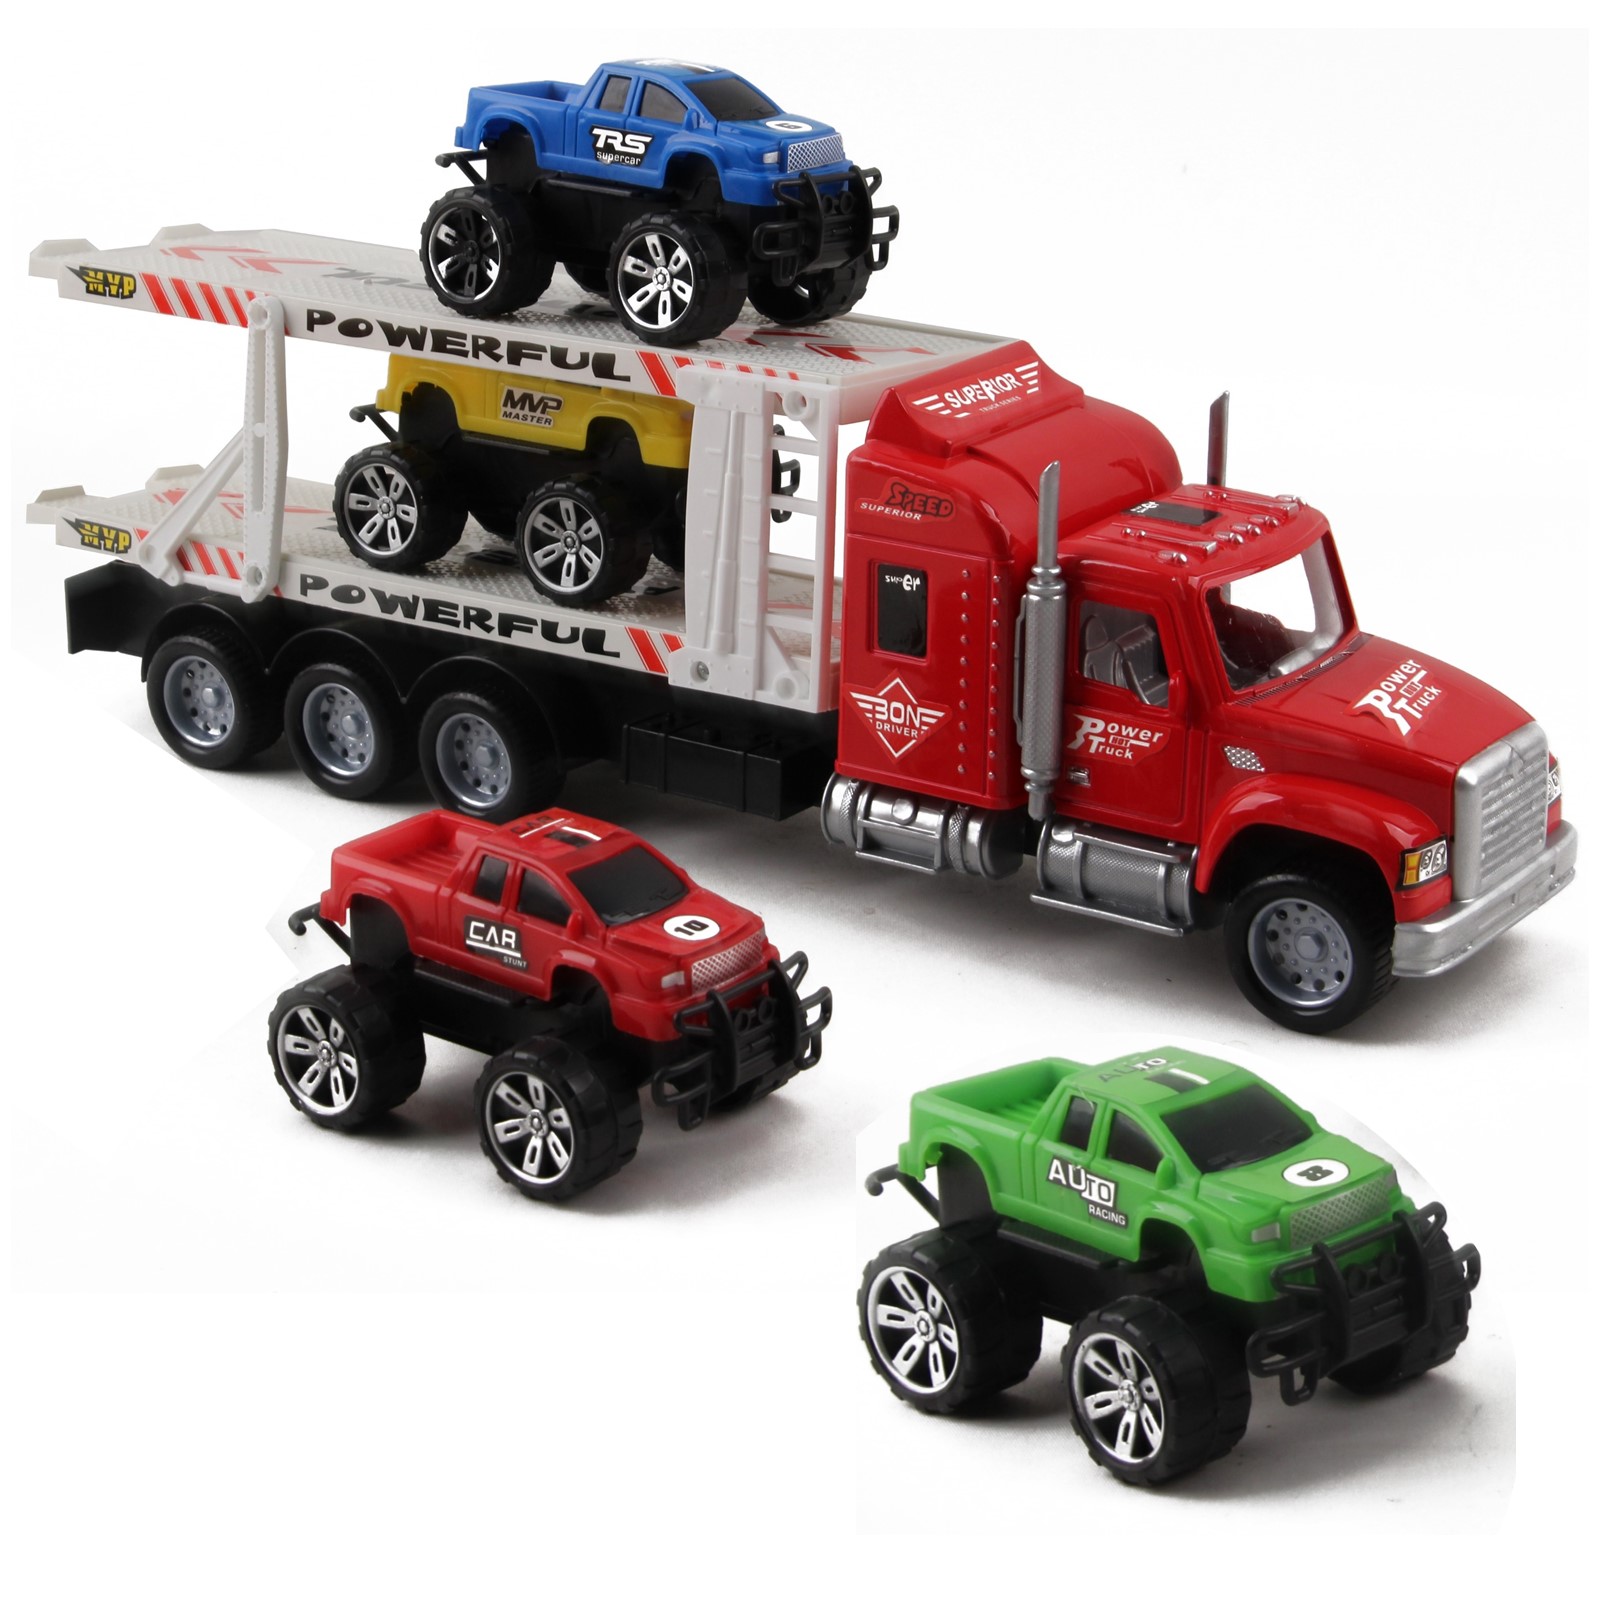 Friction Powered Toy Semi Truck Trailer 145 With Four Lifted Pickup Cars Kids Push And Go Big Rig Carrier 132 Scale Auto Transporter Semi-Truck Play Vehicle Great Gift For Children Boys Girl TH-51